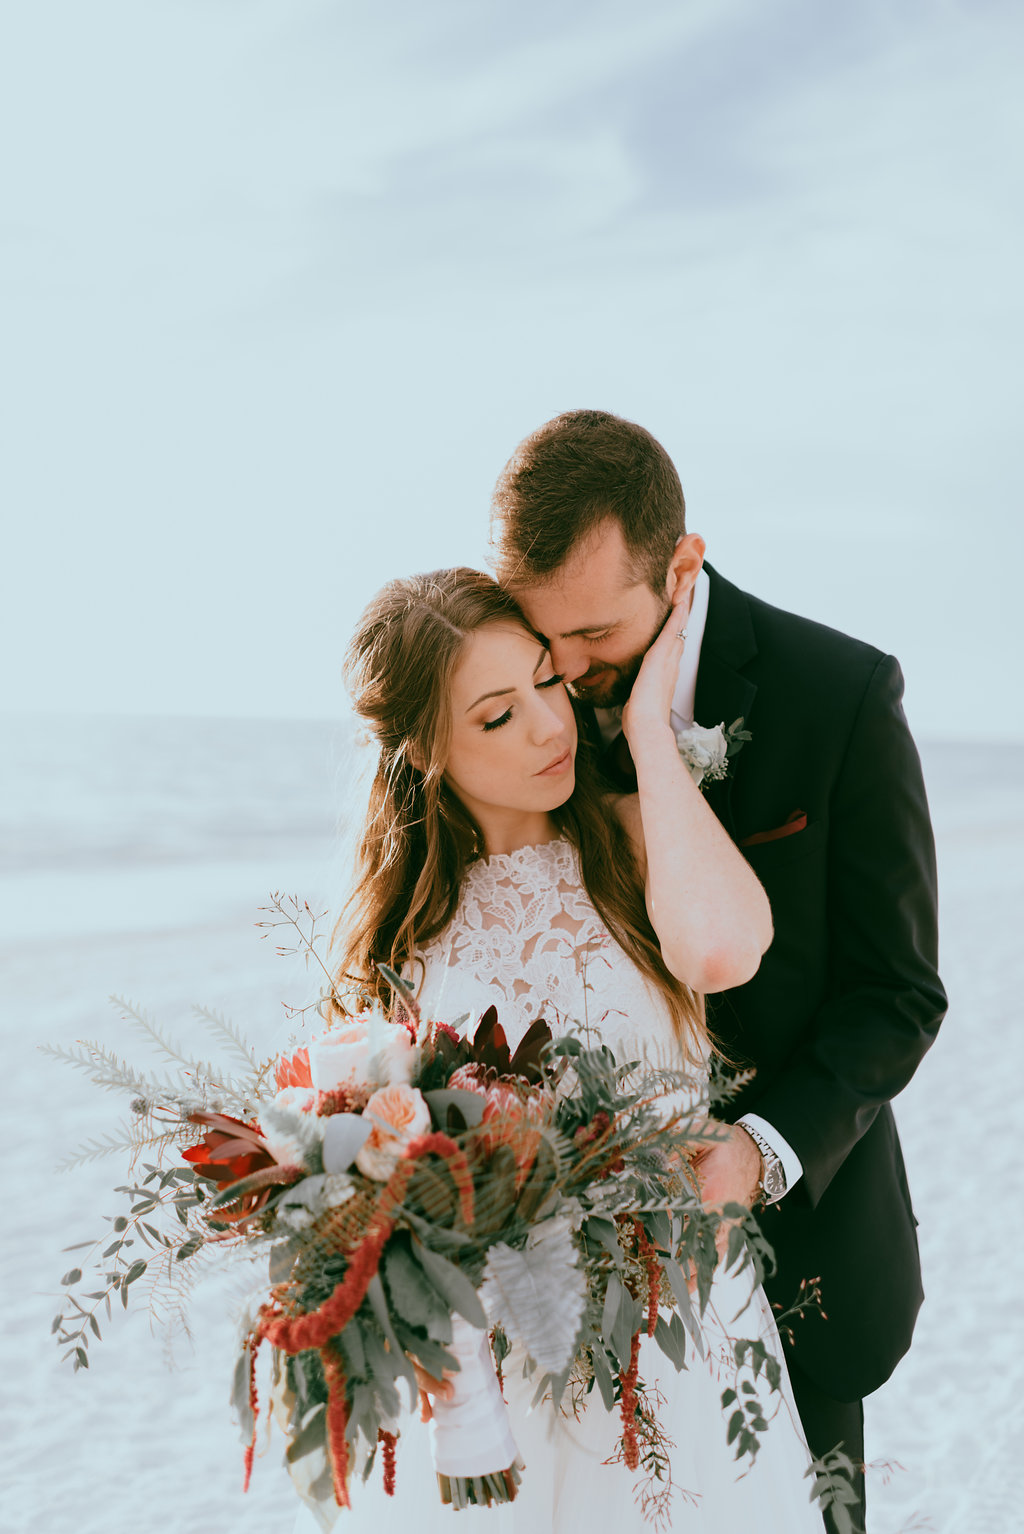 Beach Waterfront Bride and Groom Wedding Portrait with Wild Organic Red, Burgundy, Blush Pink and Greenery Floral Bouquet, Bride in Lace and Illusion High Neck Wedding Dress | St. Petersburg Wedding Venue Postcard Inn on the Beach | Tampa Bay Hair and Makeup Artist Michele Renee the Studio